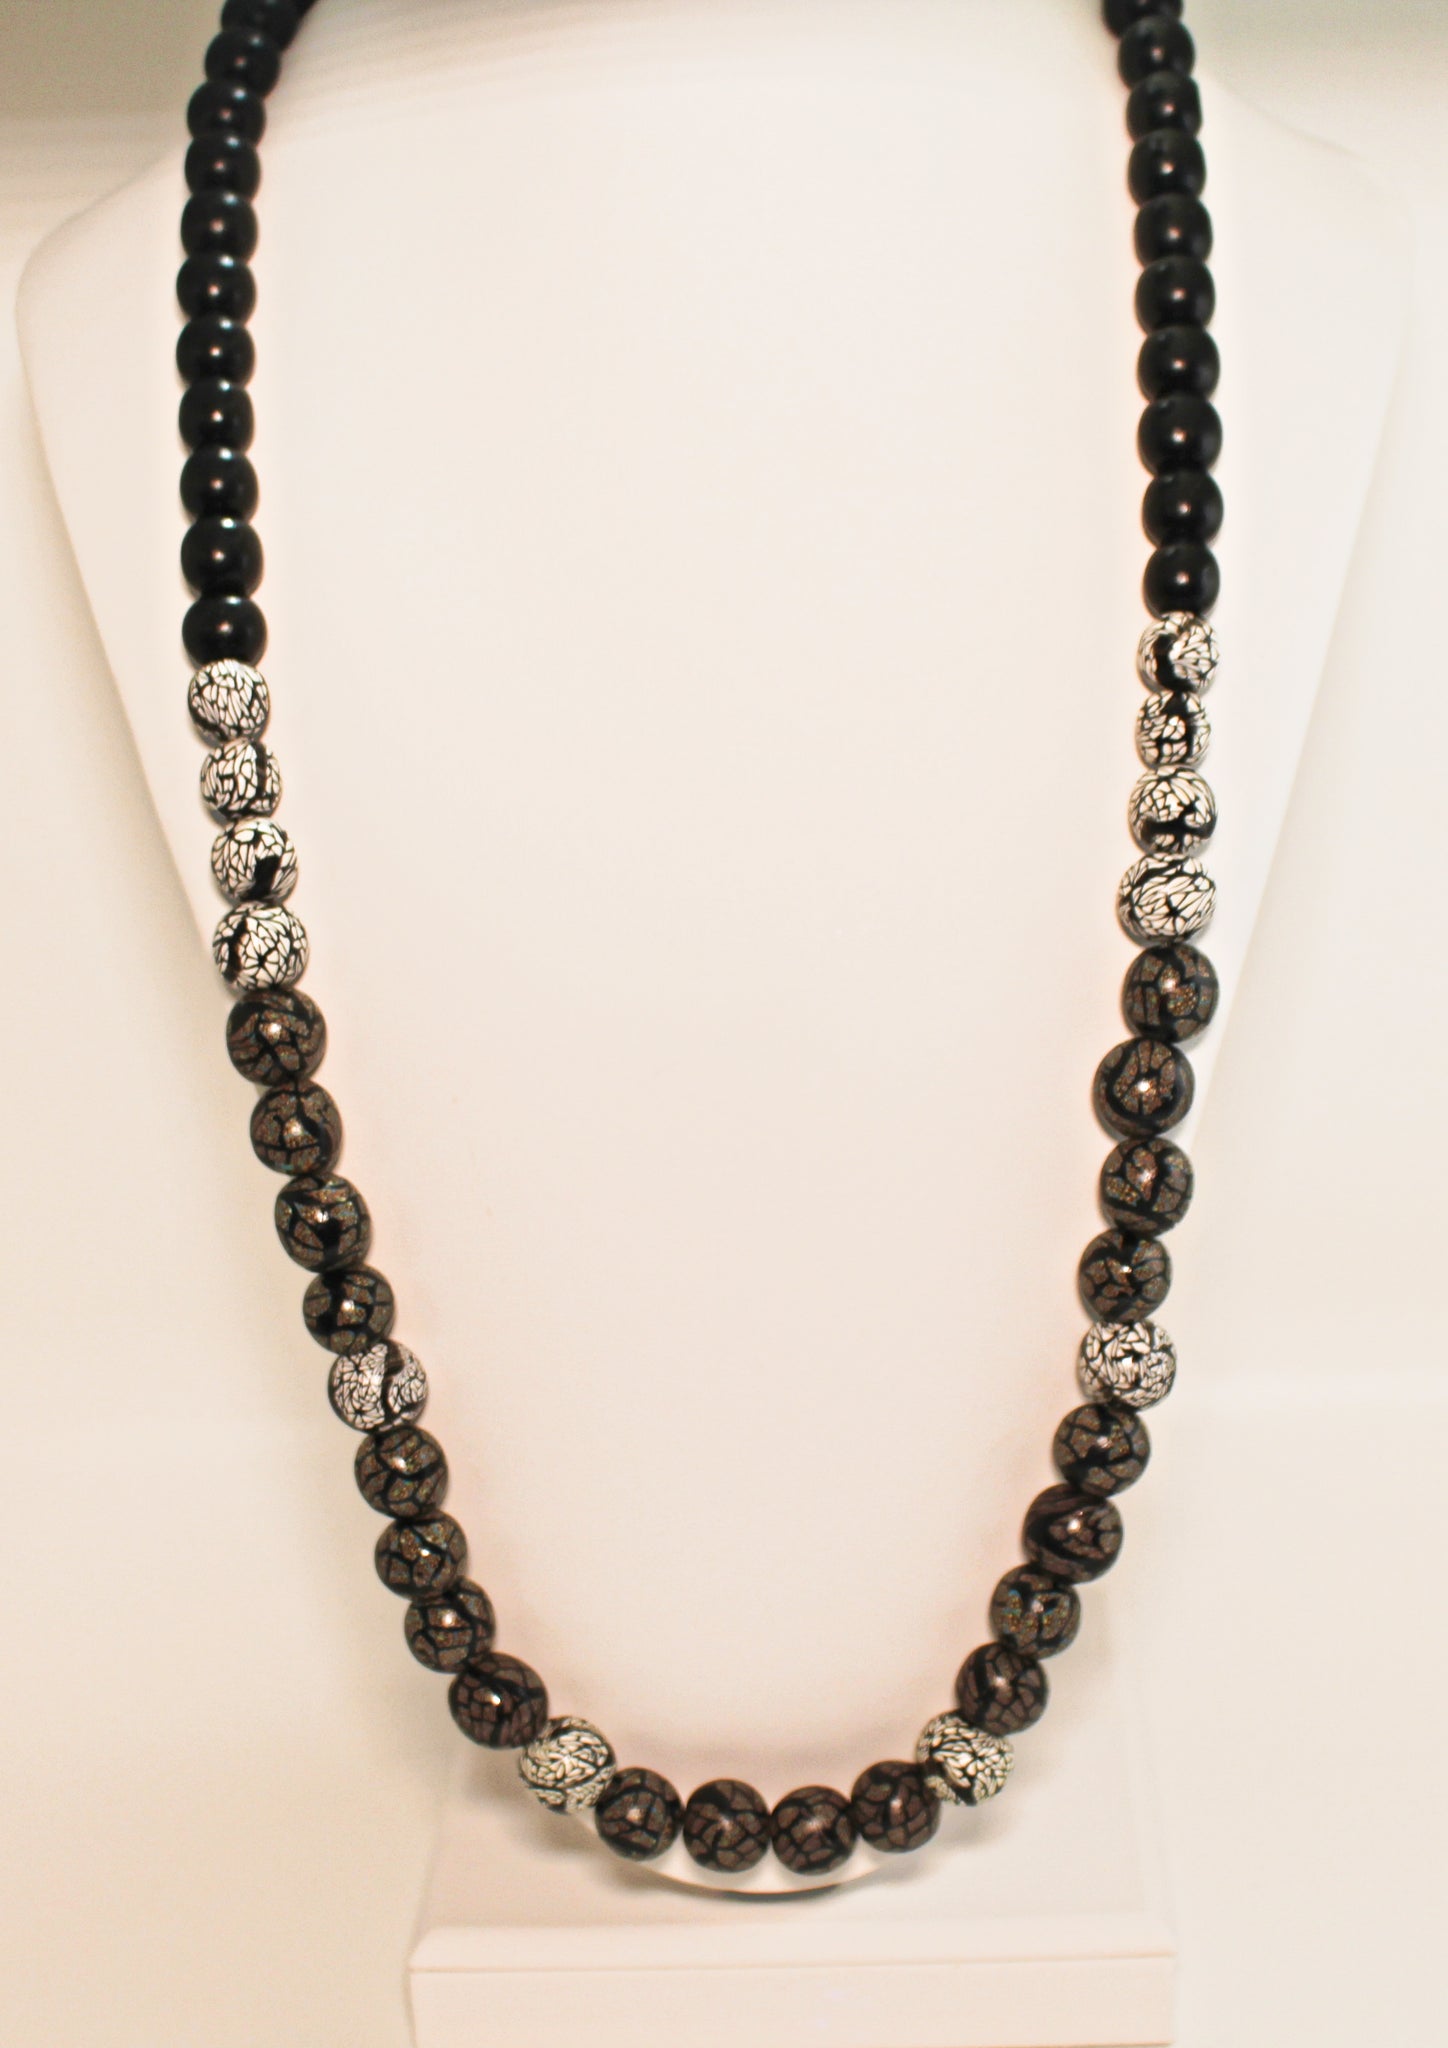 KD-SS008 The "Helix" Hand-Rolled 32 Inch, Gender Neutral, Continuous Strand Necklace